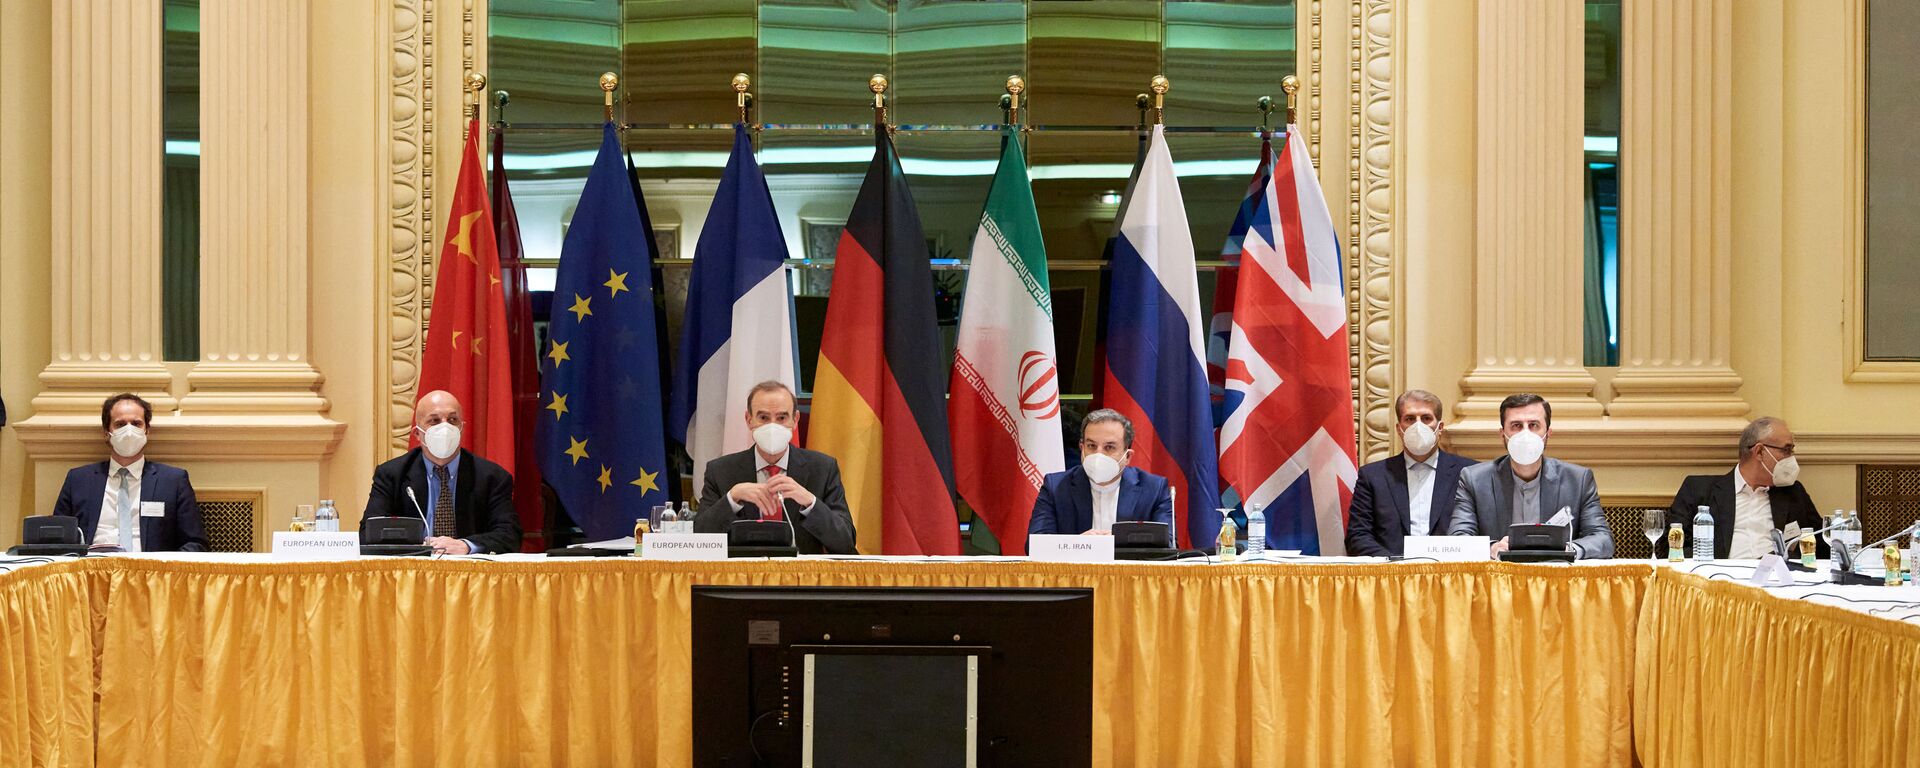 In this Handout photo made available by the EU delegation in Vienna shows  Diplomats of the EU, China, Russia and Iran at the start of talks at the Grand Hotel in Vienna on April 6, 2021.  - Sputnik International, 1920, 27.05.2021